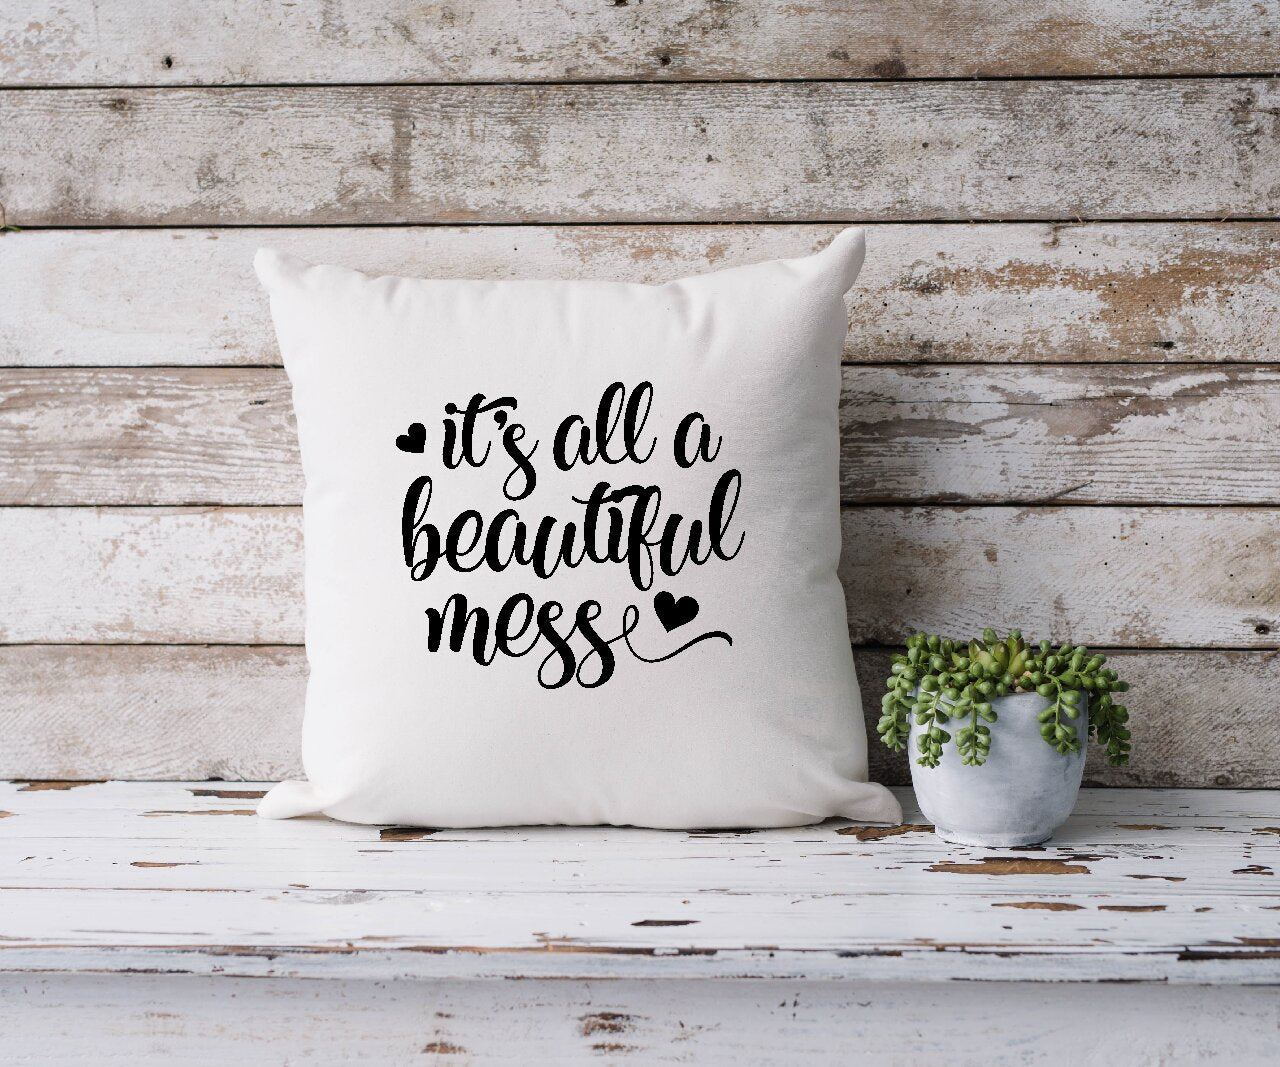 It's All A Beautiful Mess - Cushion Cover